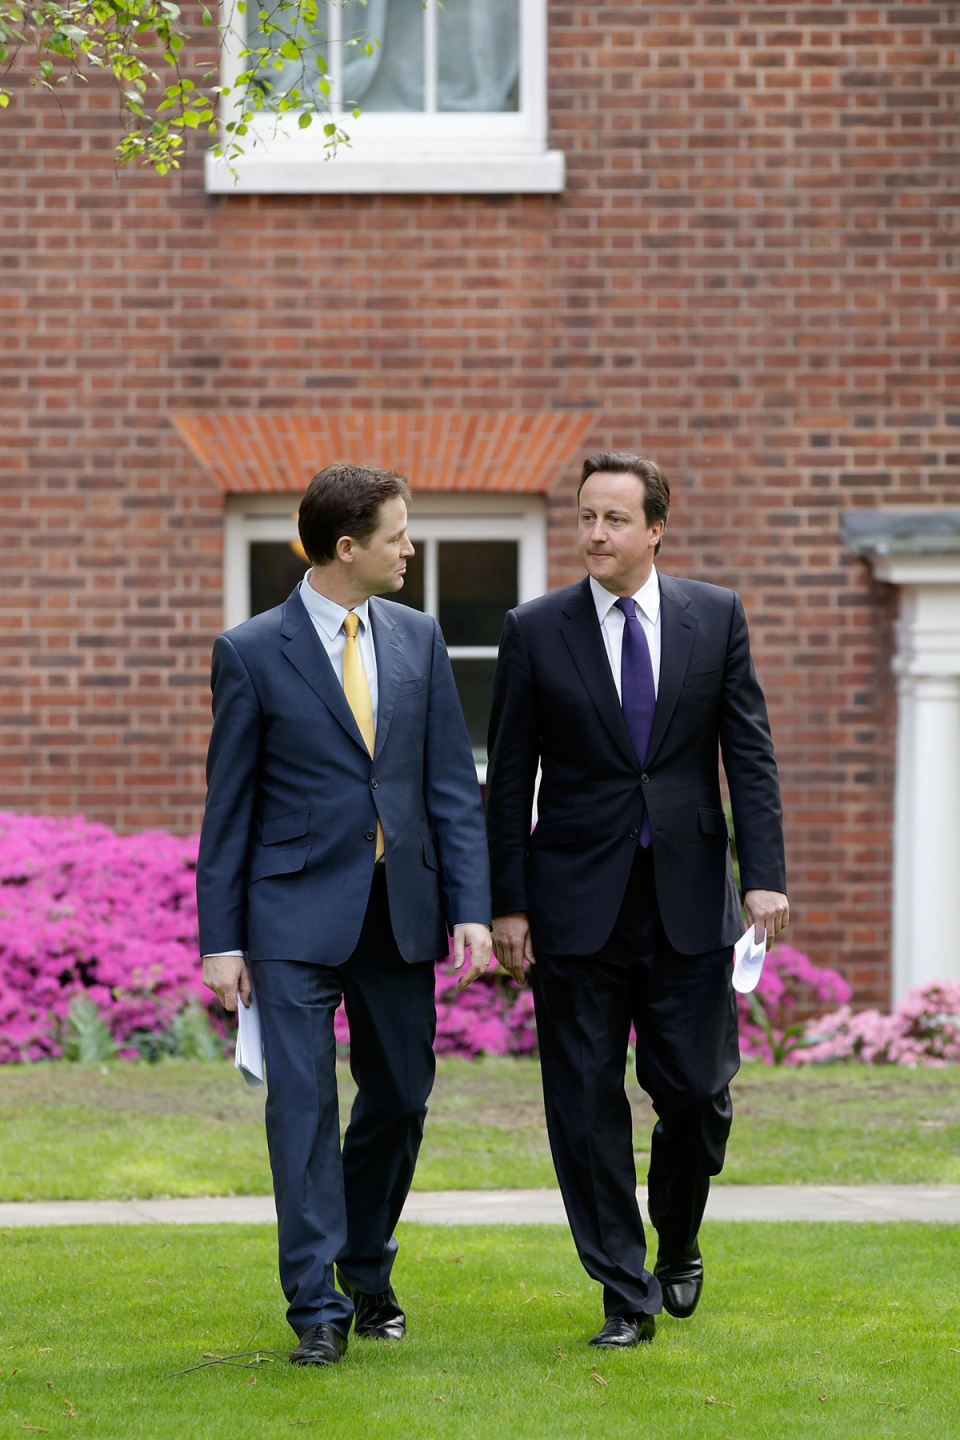 Prime Minister David Cameron (right) and Deputy Prime Minister Nick Clegg arriving to their first joint press conference in the Downing Street garden (PA)